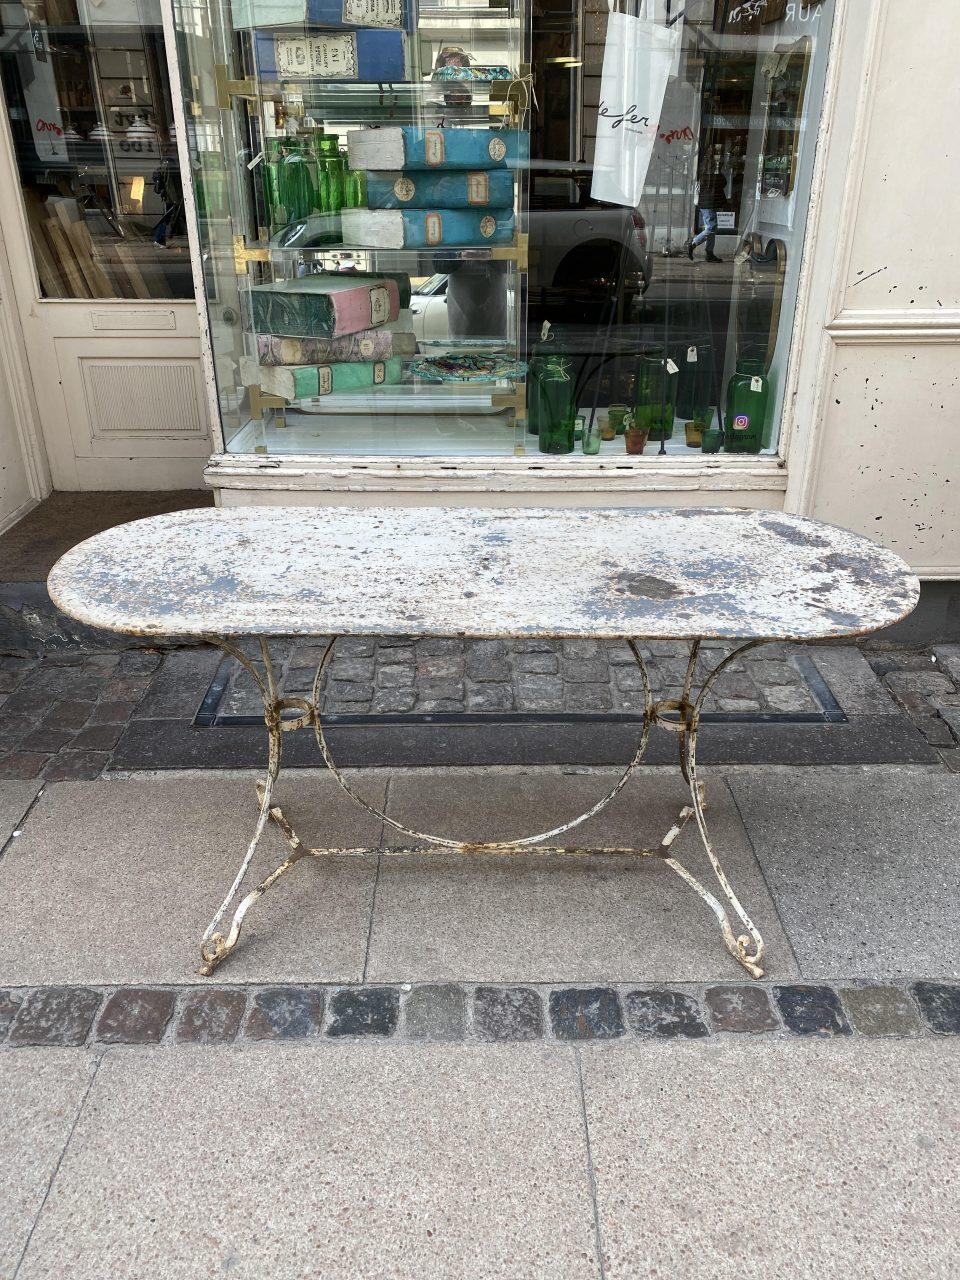 Much sought after old French garden table / café table, with a rare and distinctive table top and marvellous patina.

Elegantly designed in iron, the table has a charming oval table top and rounded edges as well as a beautifully eye-catching